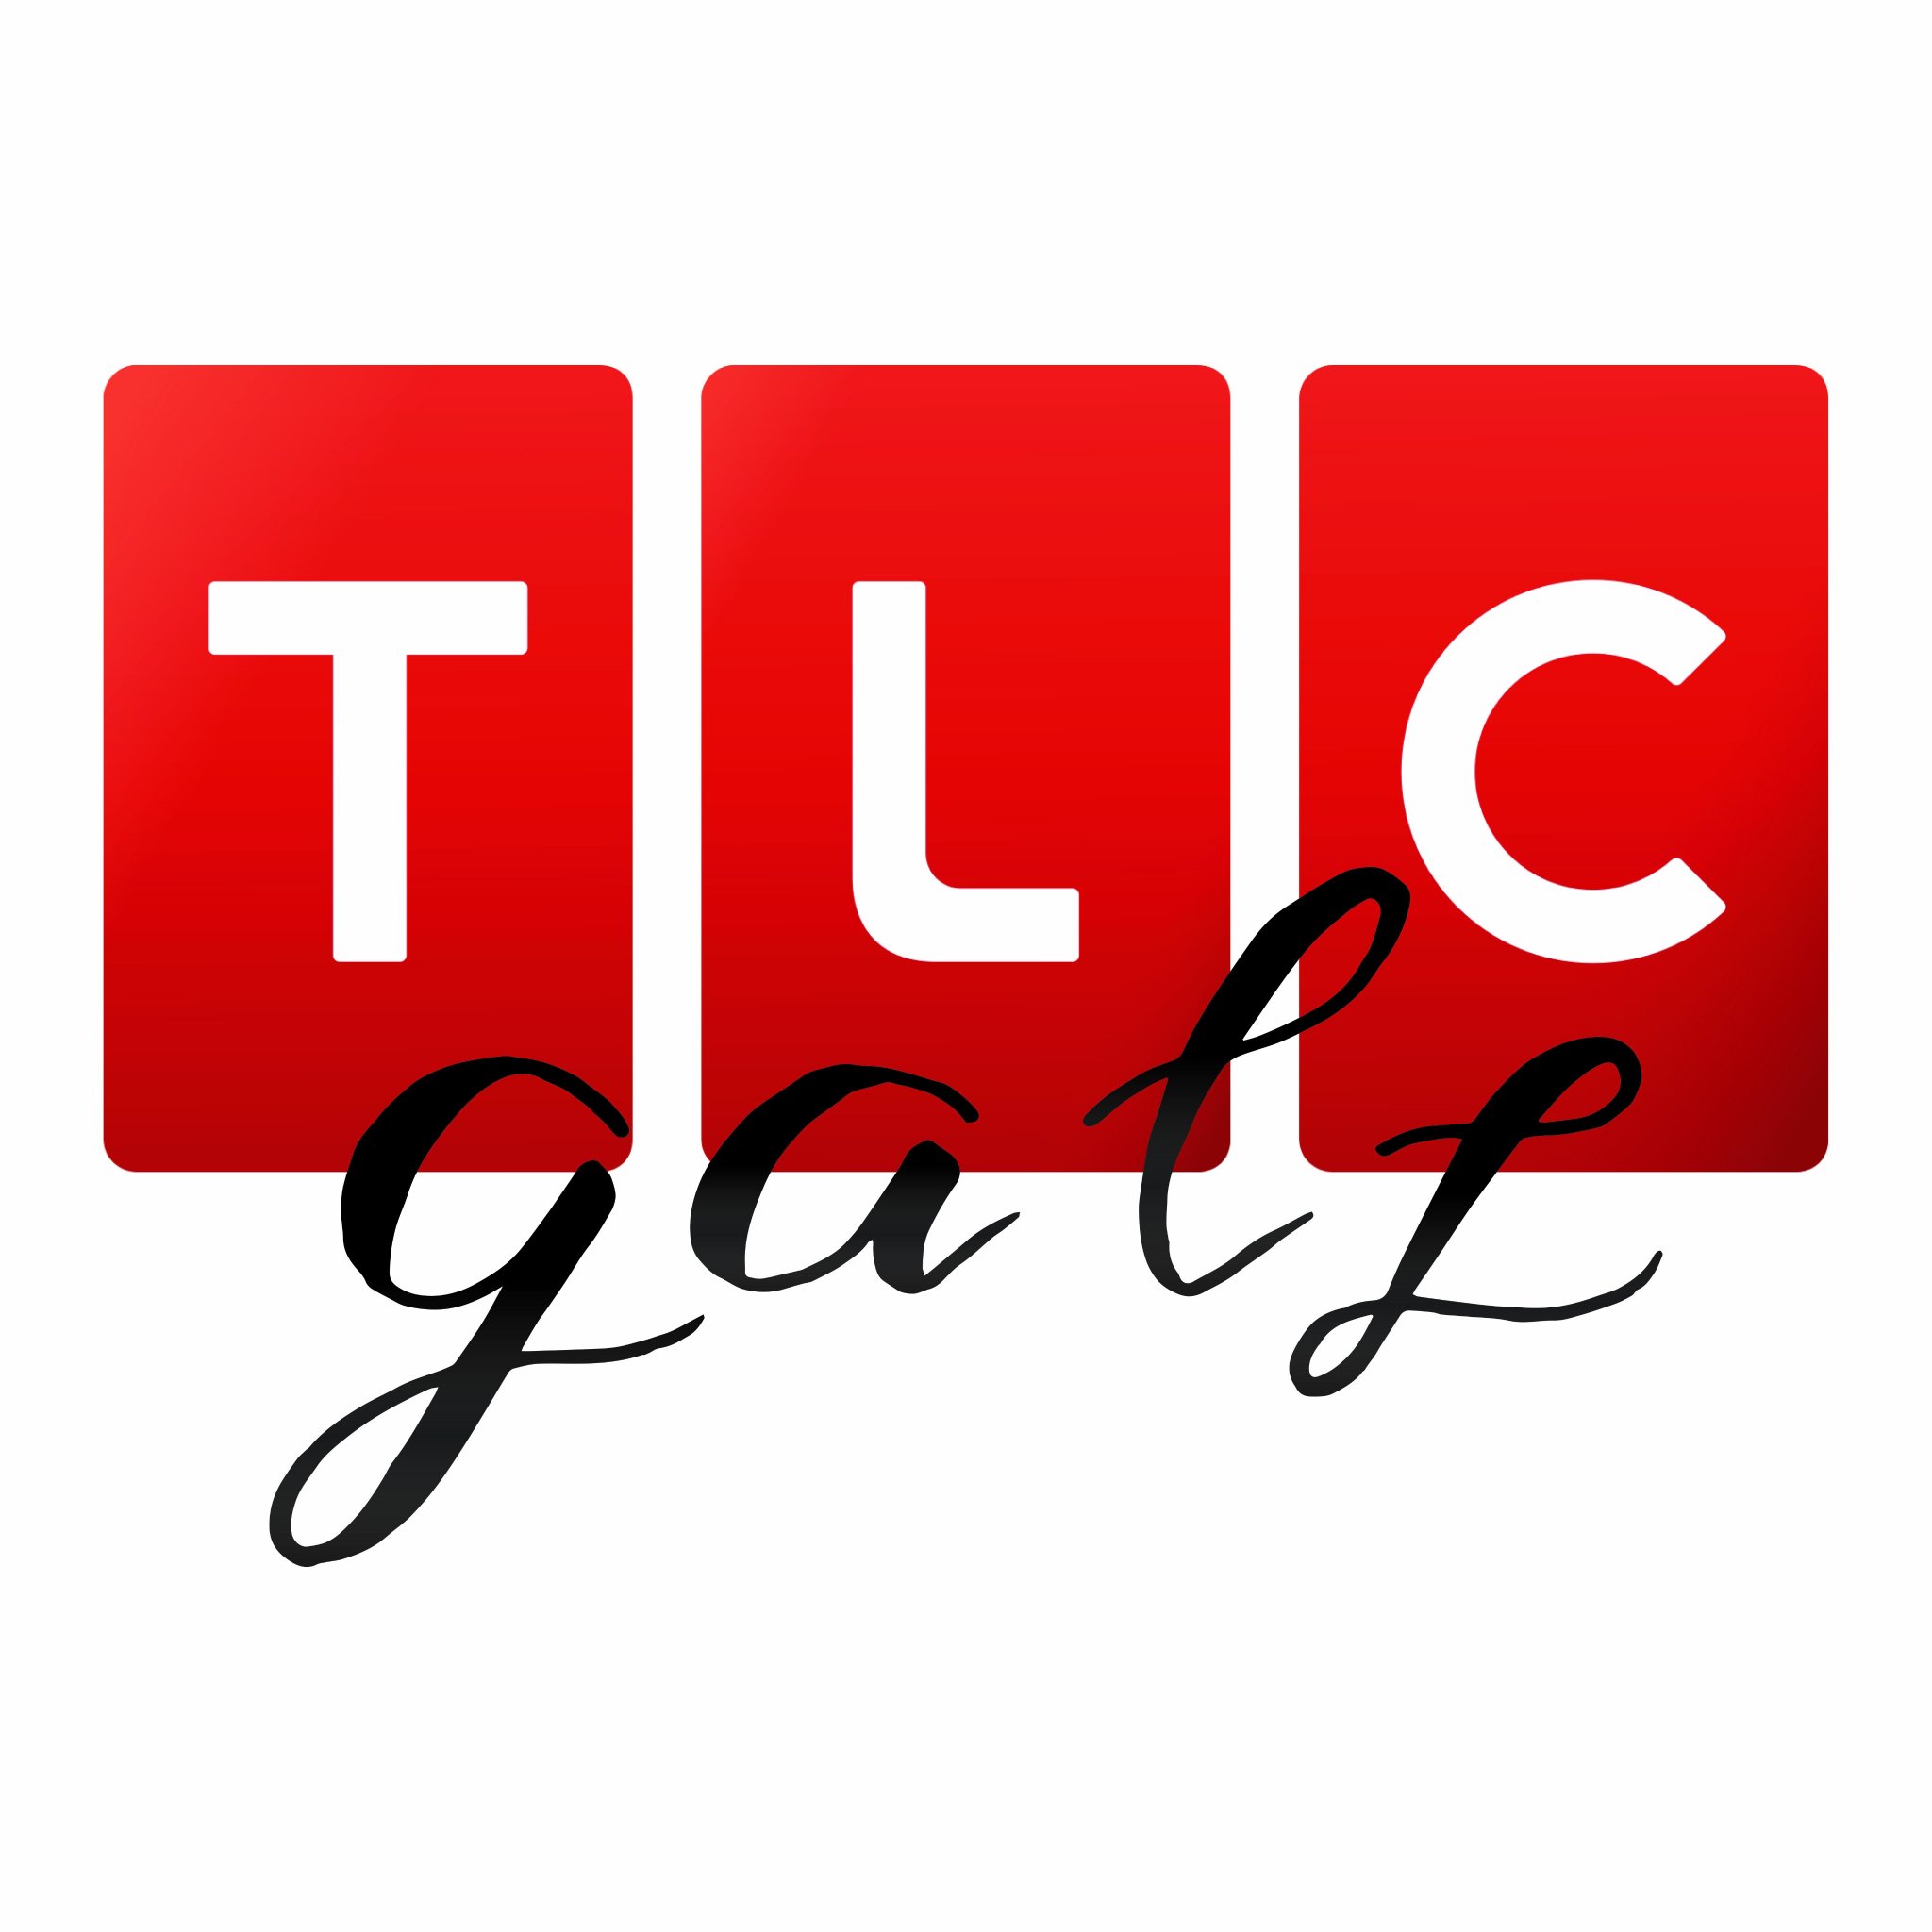 TLC gals is a podcast about the best shows on the TLC network! Watch and listen along!